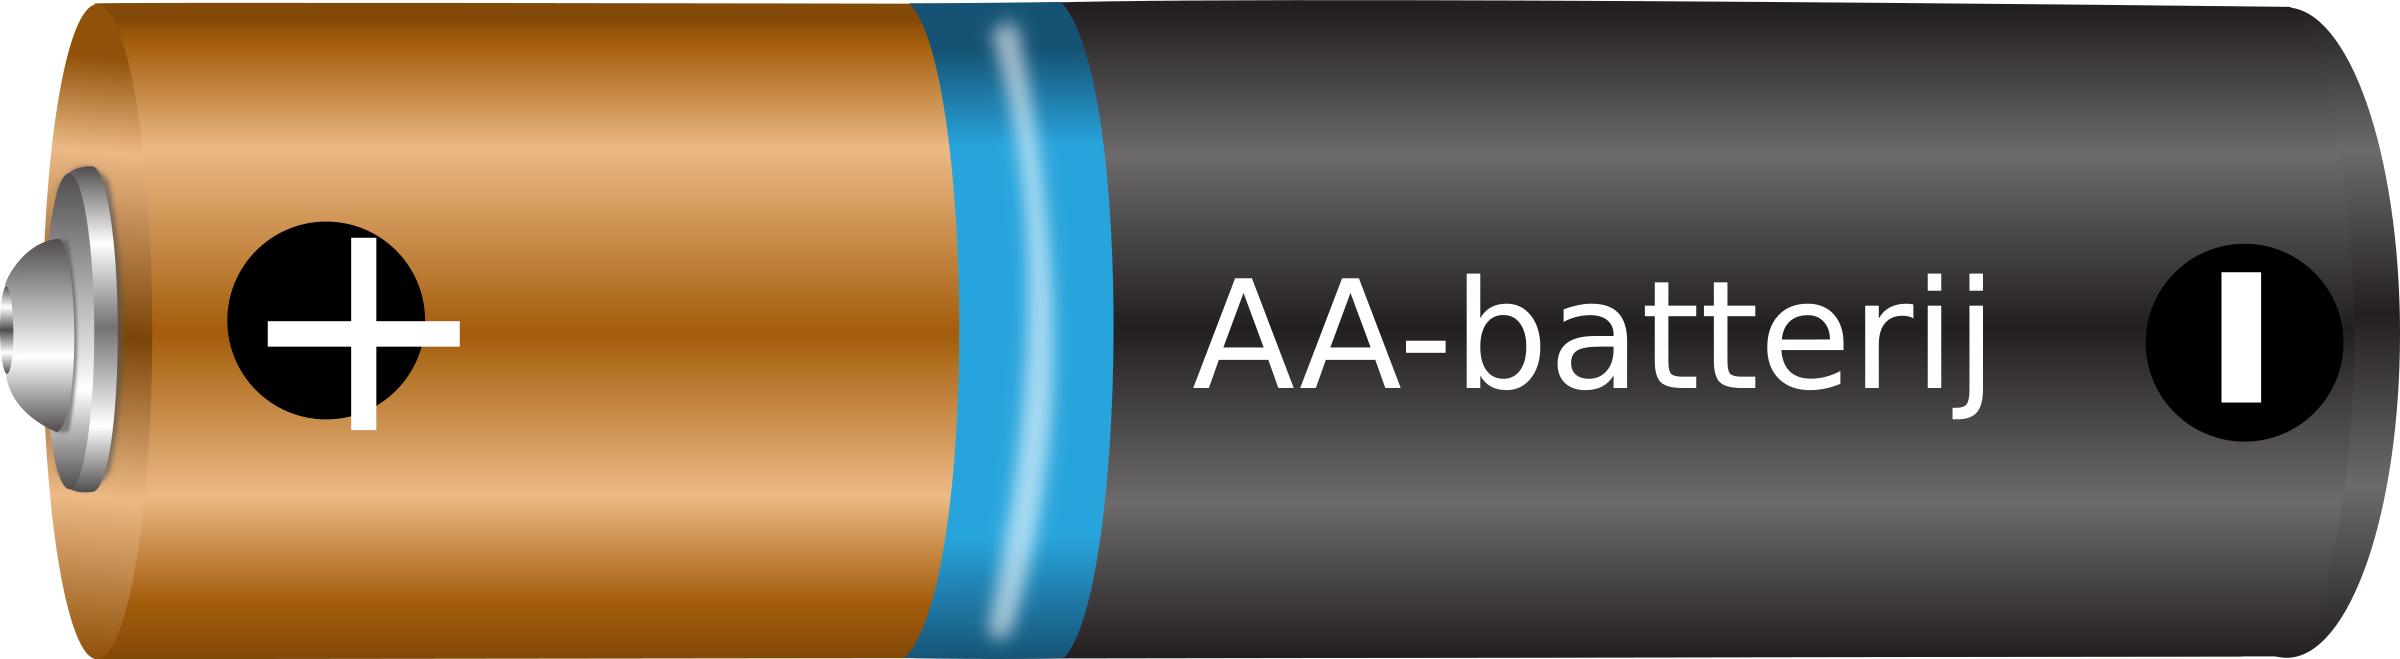 AA-battery png